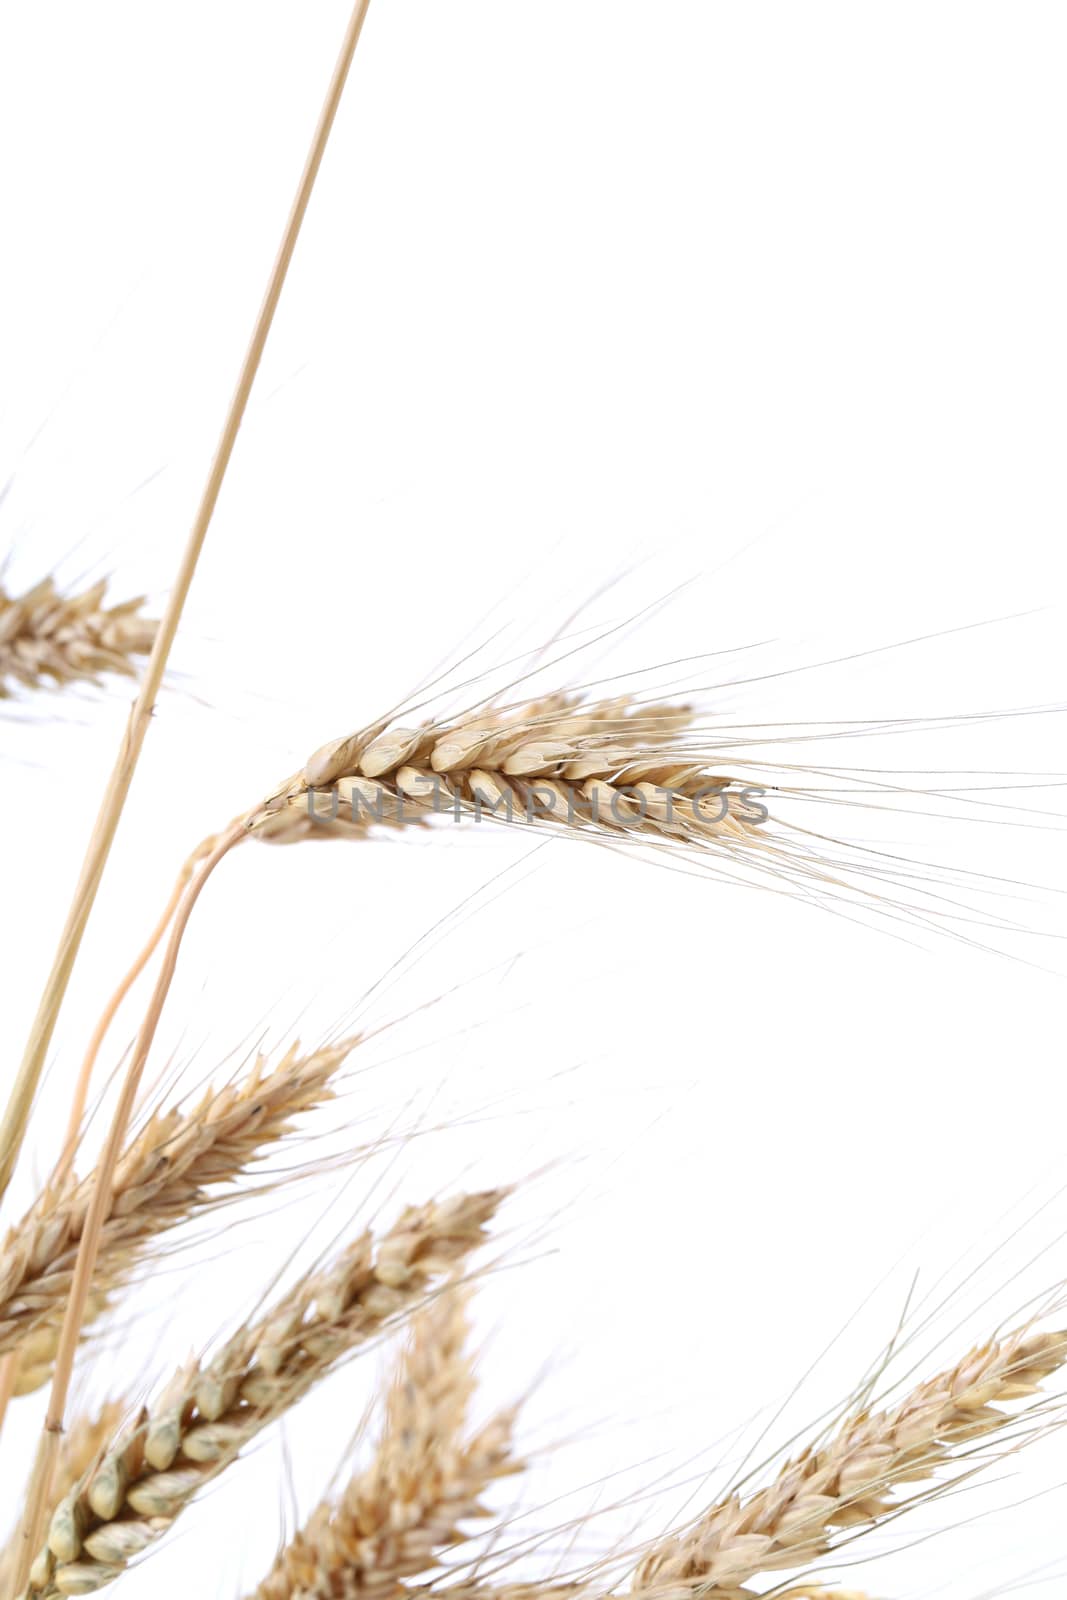 Wheat ears. Isolated on a white background.